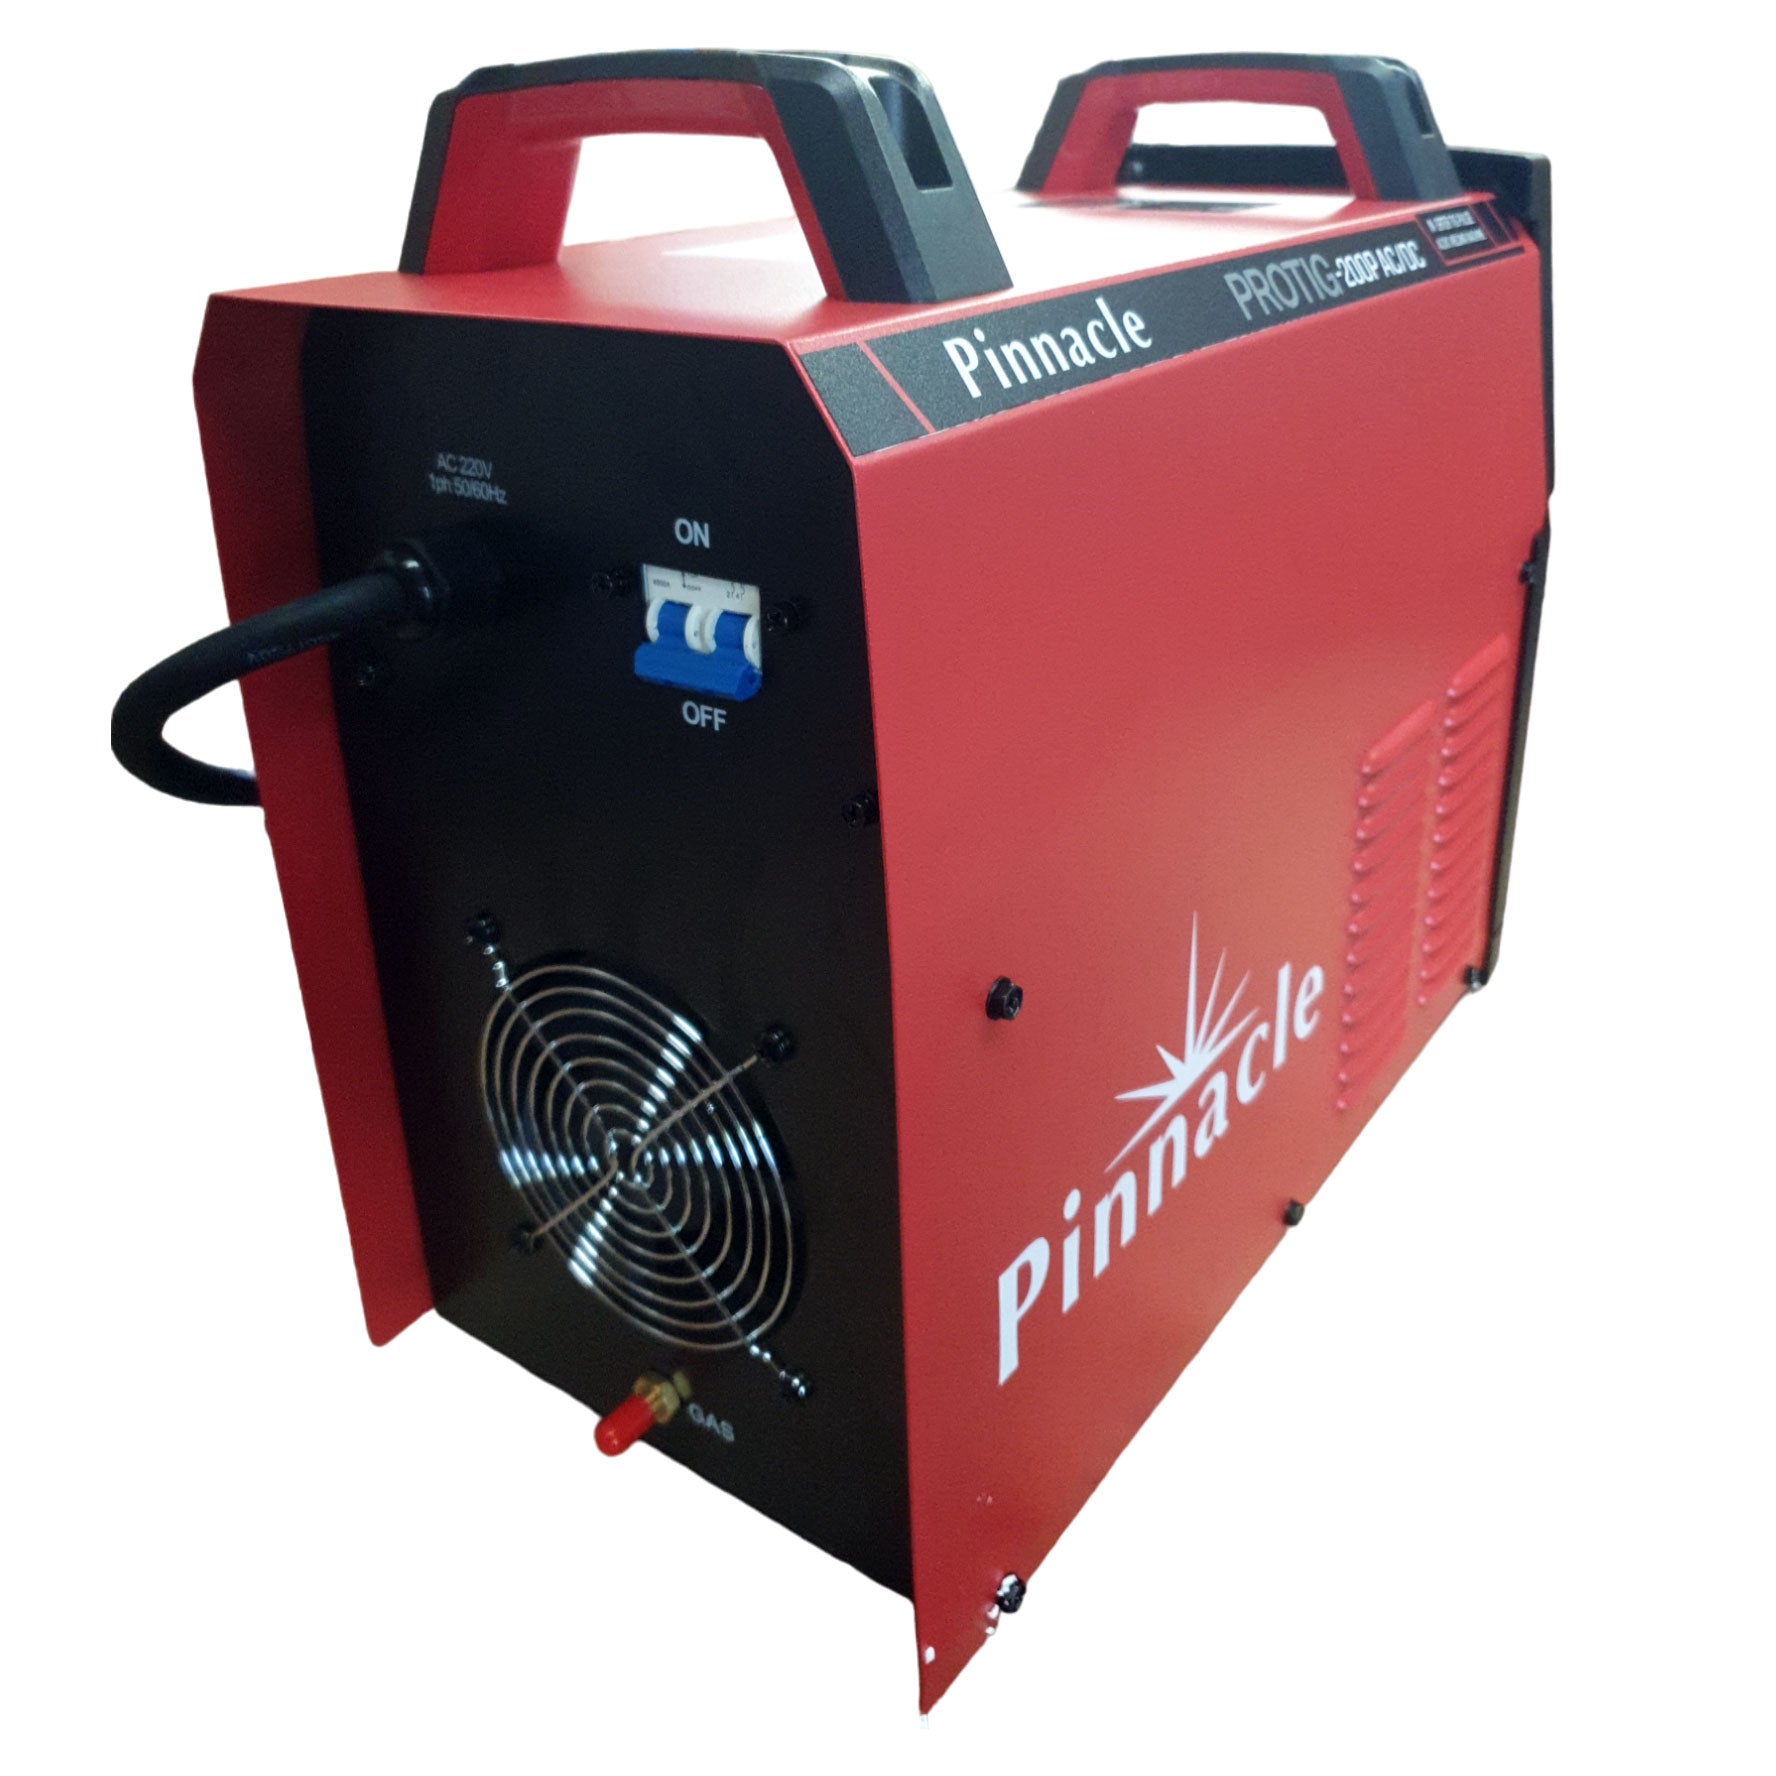 Back view image of PROTIG 200P TIG welder highlighting the cooling fan and various connection points, tailored for efficient welding operations.